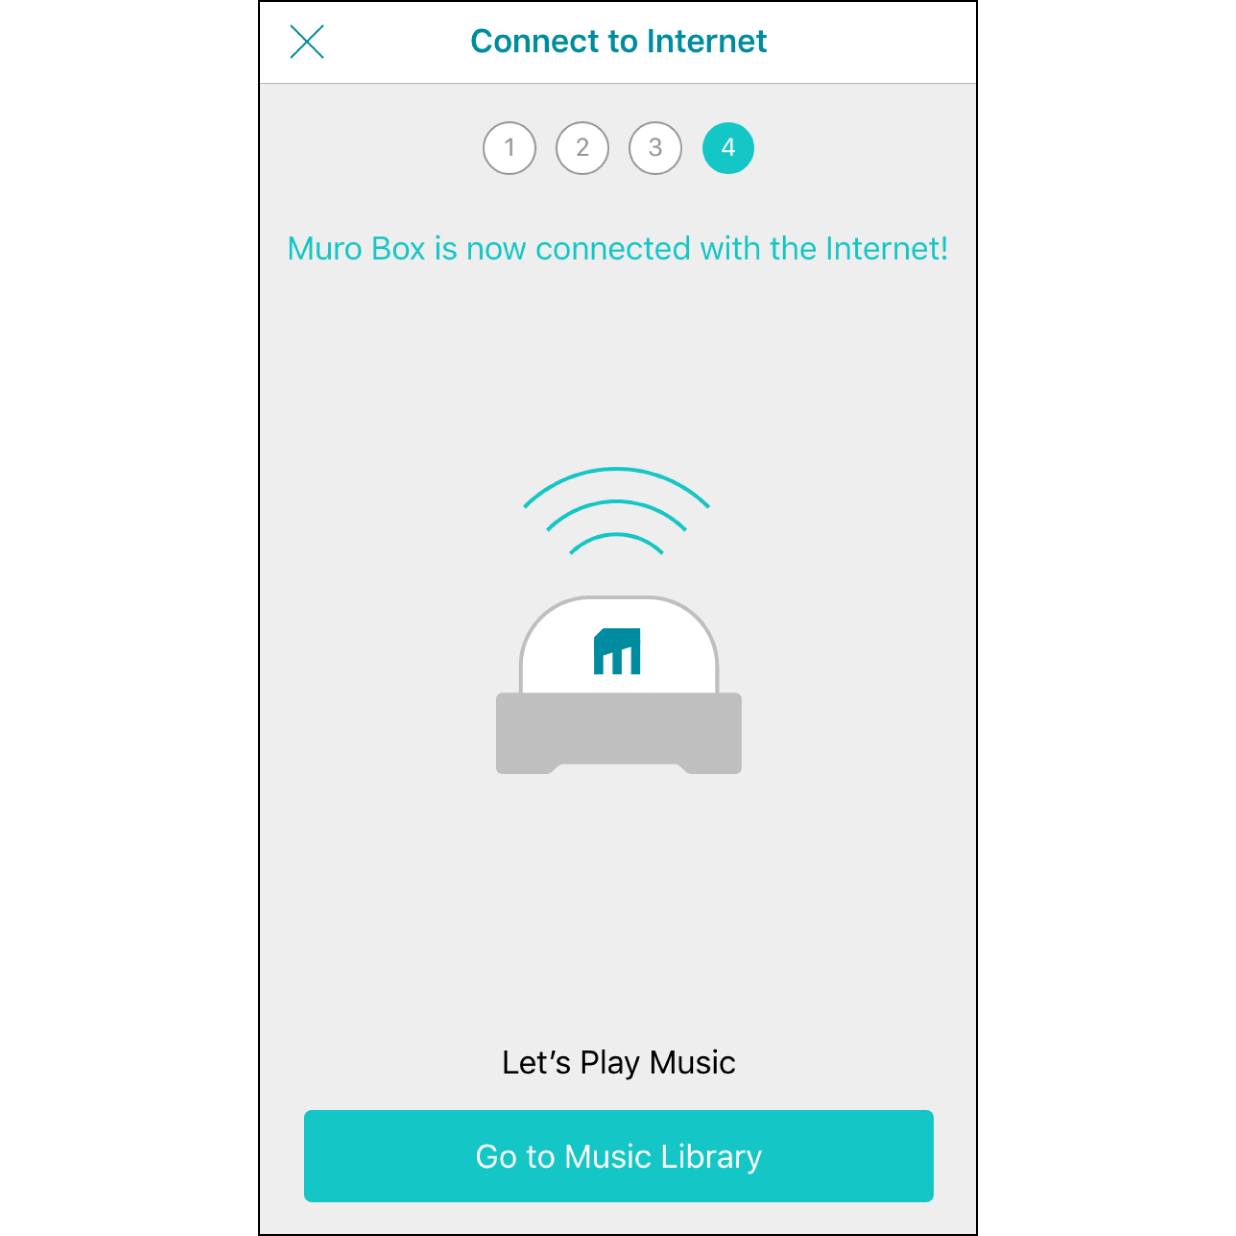 10. Connected to Muro Box Wi-Fi. After finishing the connection, you will hear a ding-dong sound from the Muro Box, and it will indicate "Connected to Muro Box". Click "Go to the Playlist" to play songs.